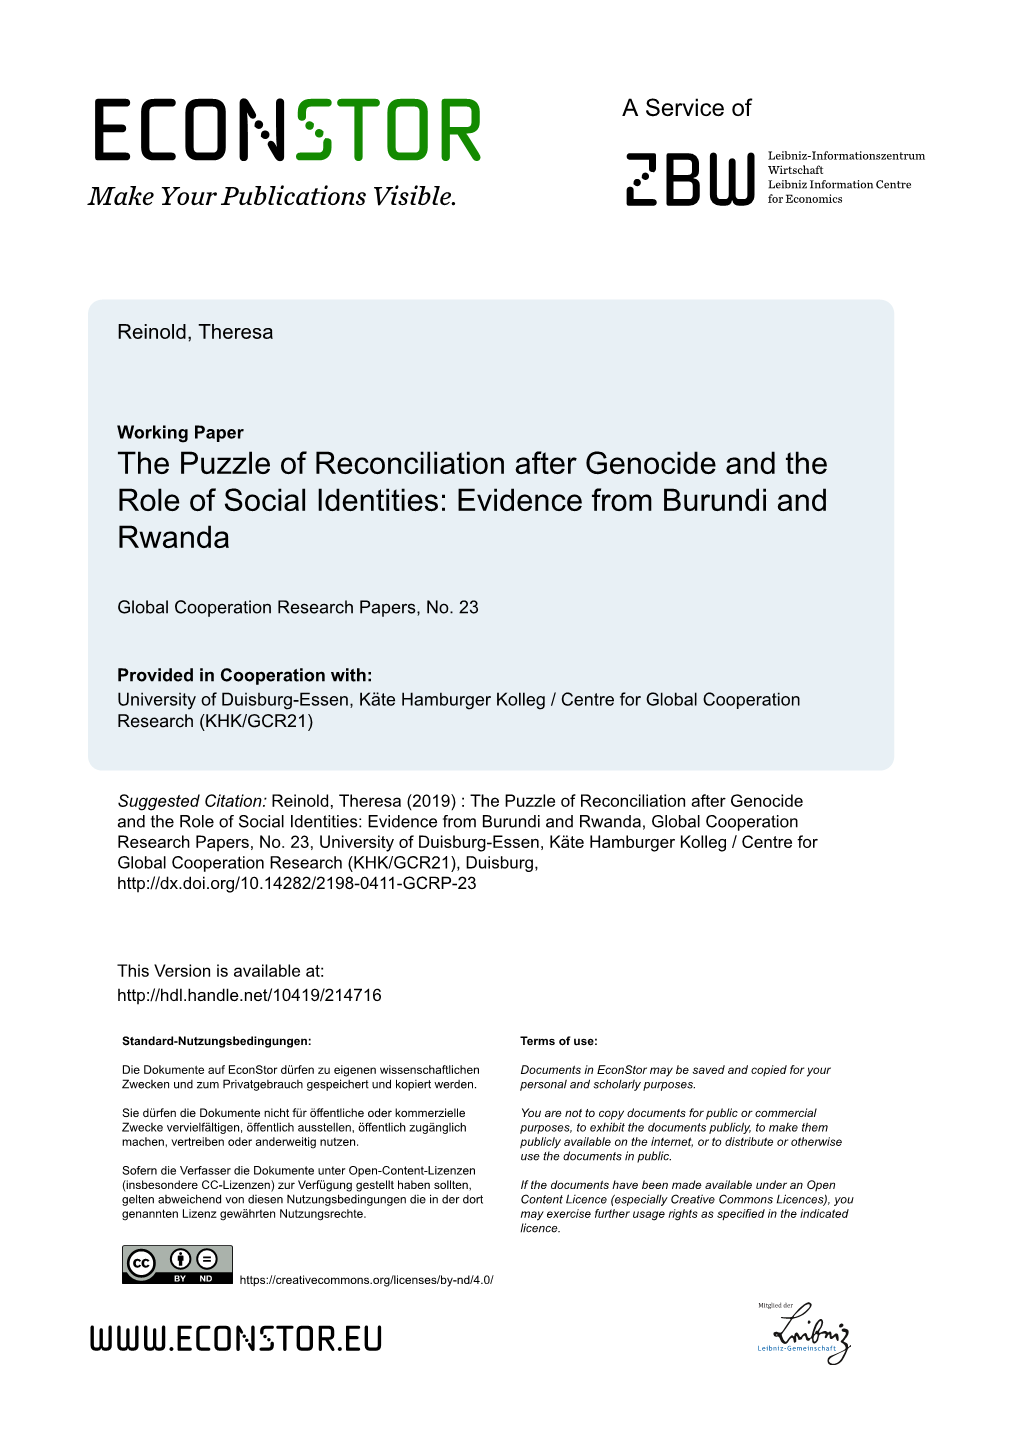 The Puzzle of Reconciliation After Genocide and the Role of Social Identities: Evidence from Burundi and Rwanda